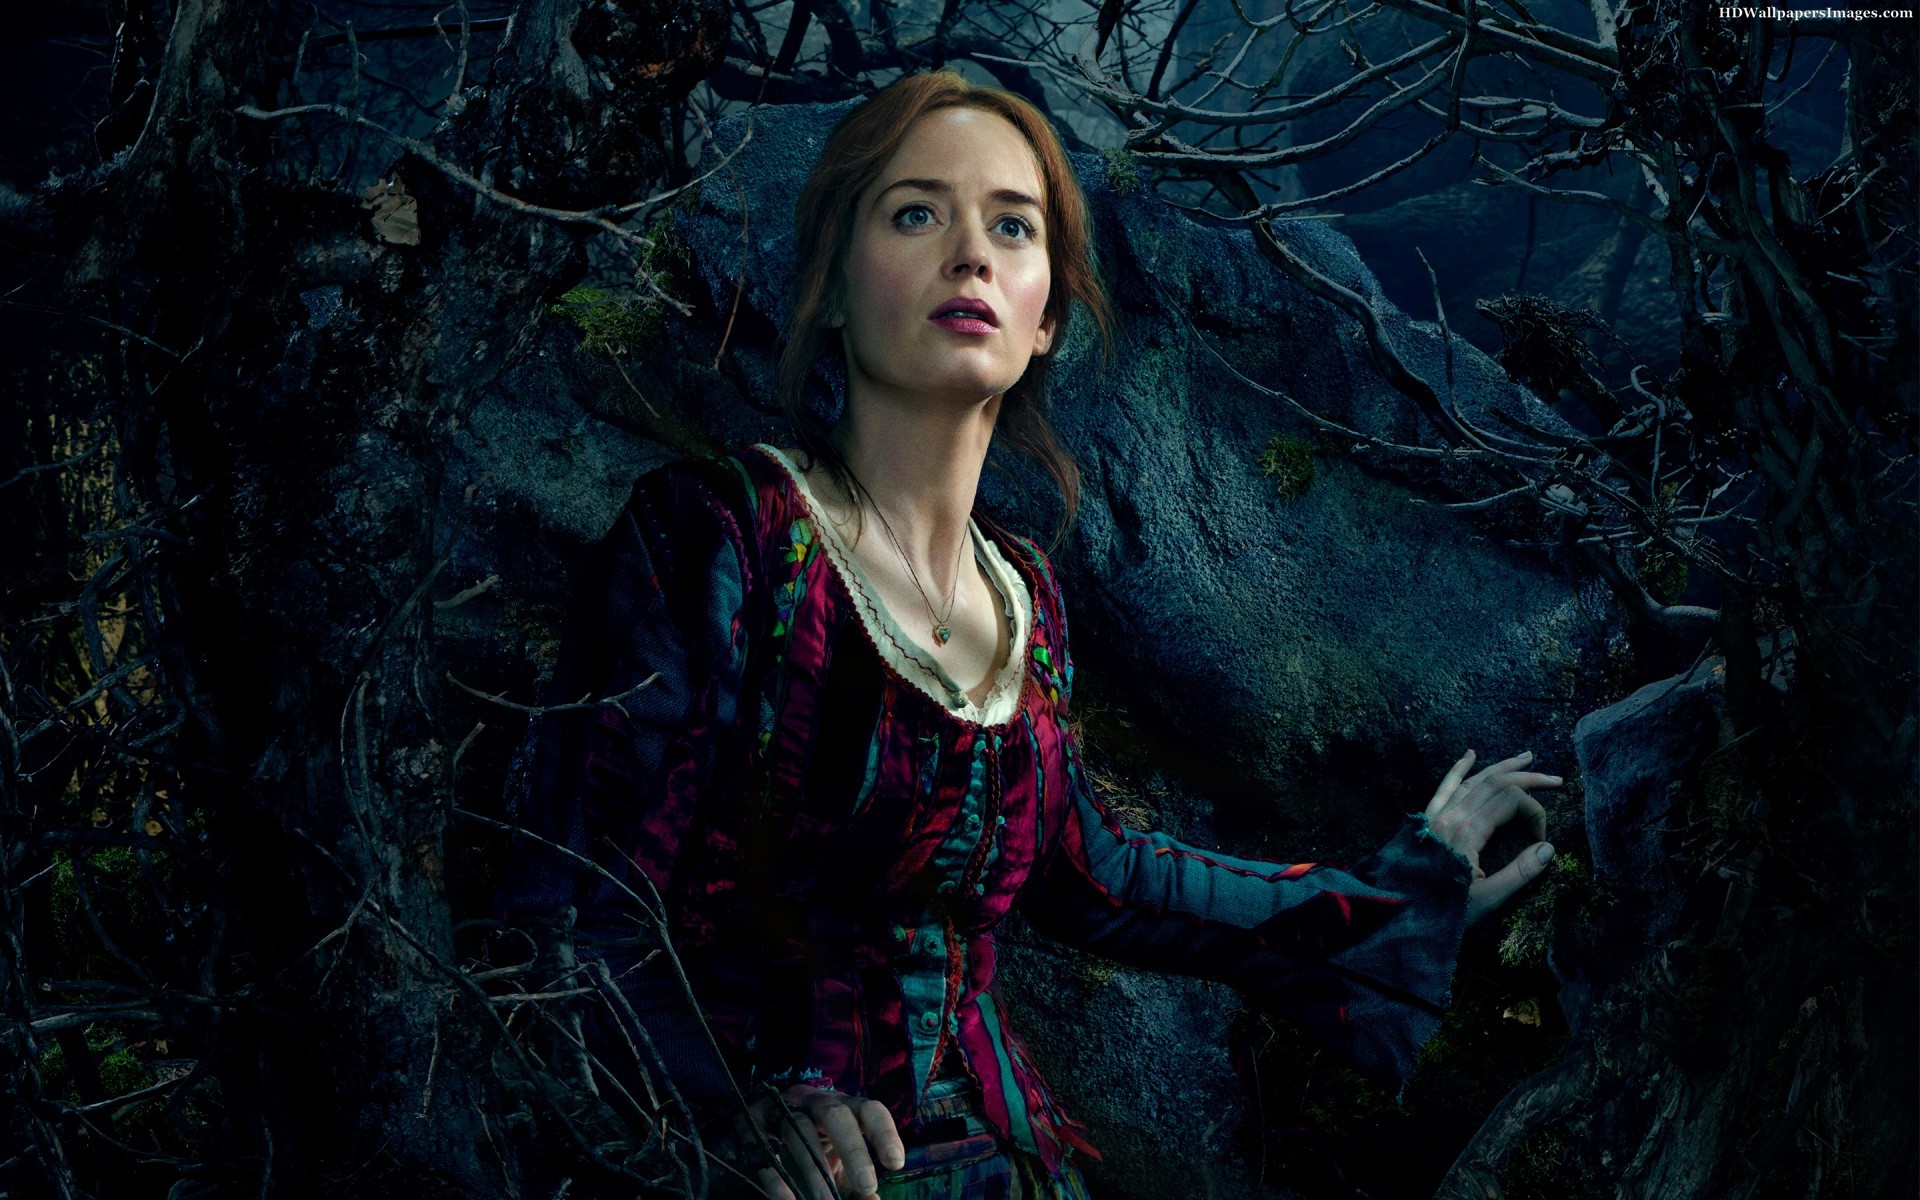 Emily-Blunt-Into-The-Woods-Images[1]